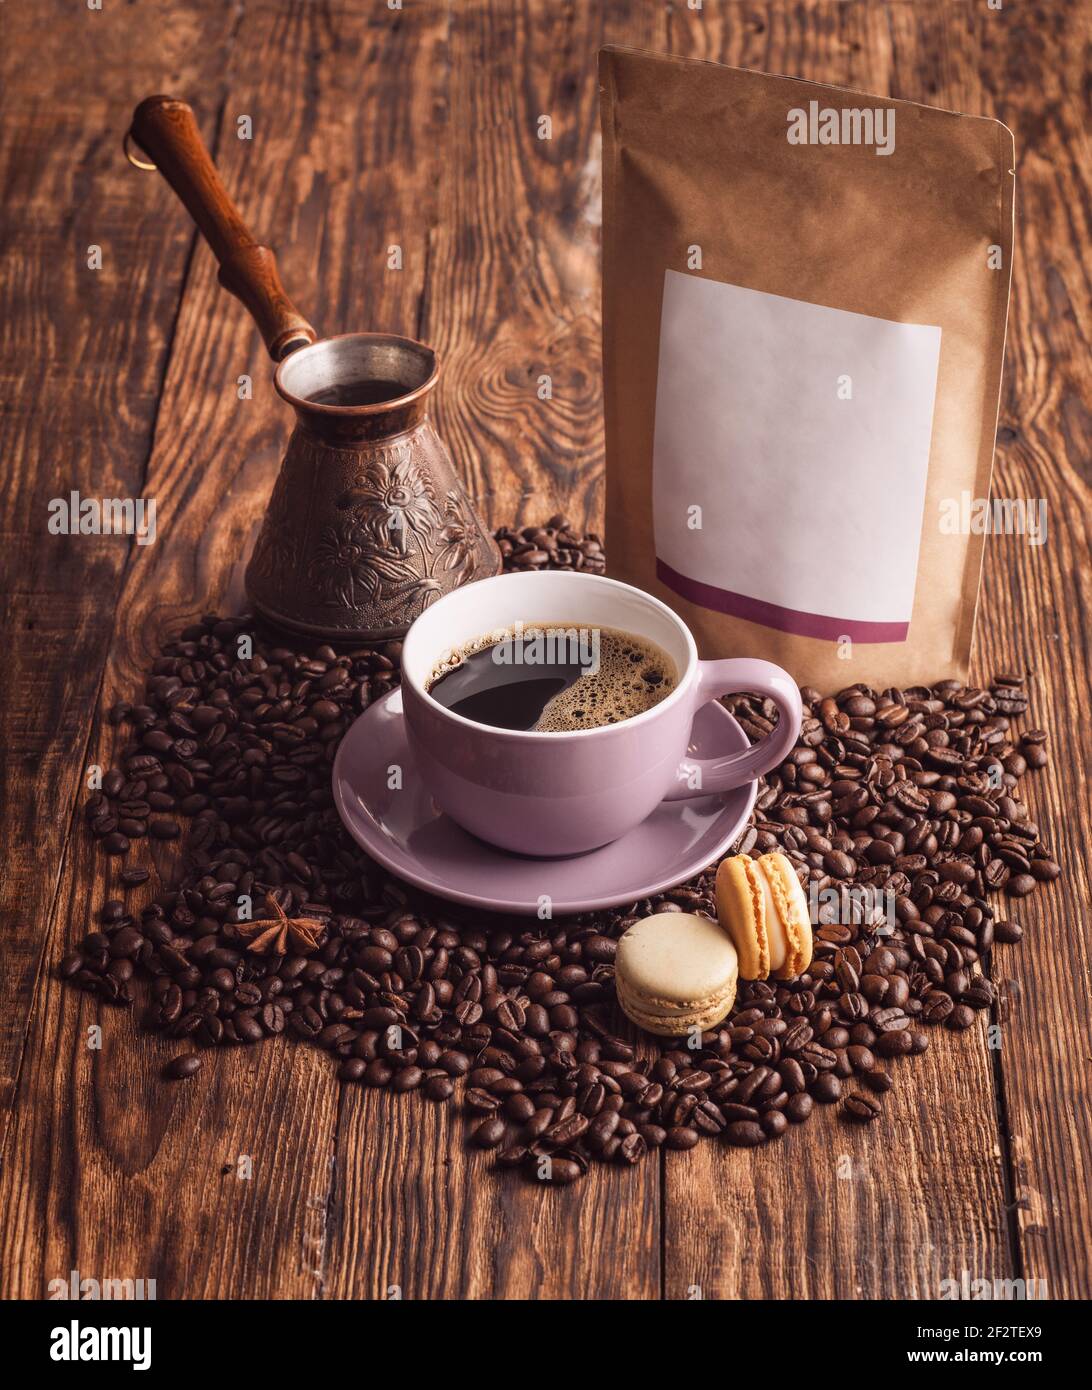 https://c8.alamy.com/comp/2F2TEX9/purple-cup-of-coffee-macaroons-beans-turkish-coffee-pot-and-craft-paper-pouch-bag-on-wooden-backgroun-2F2TEX9.jpg